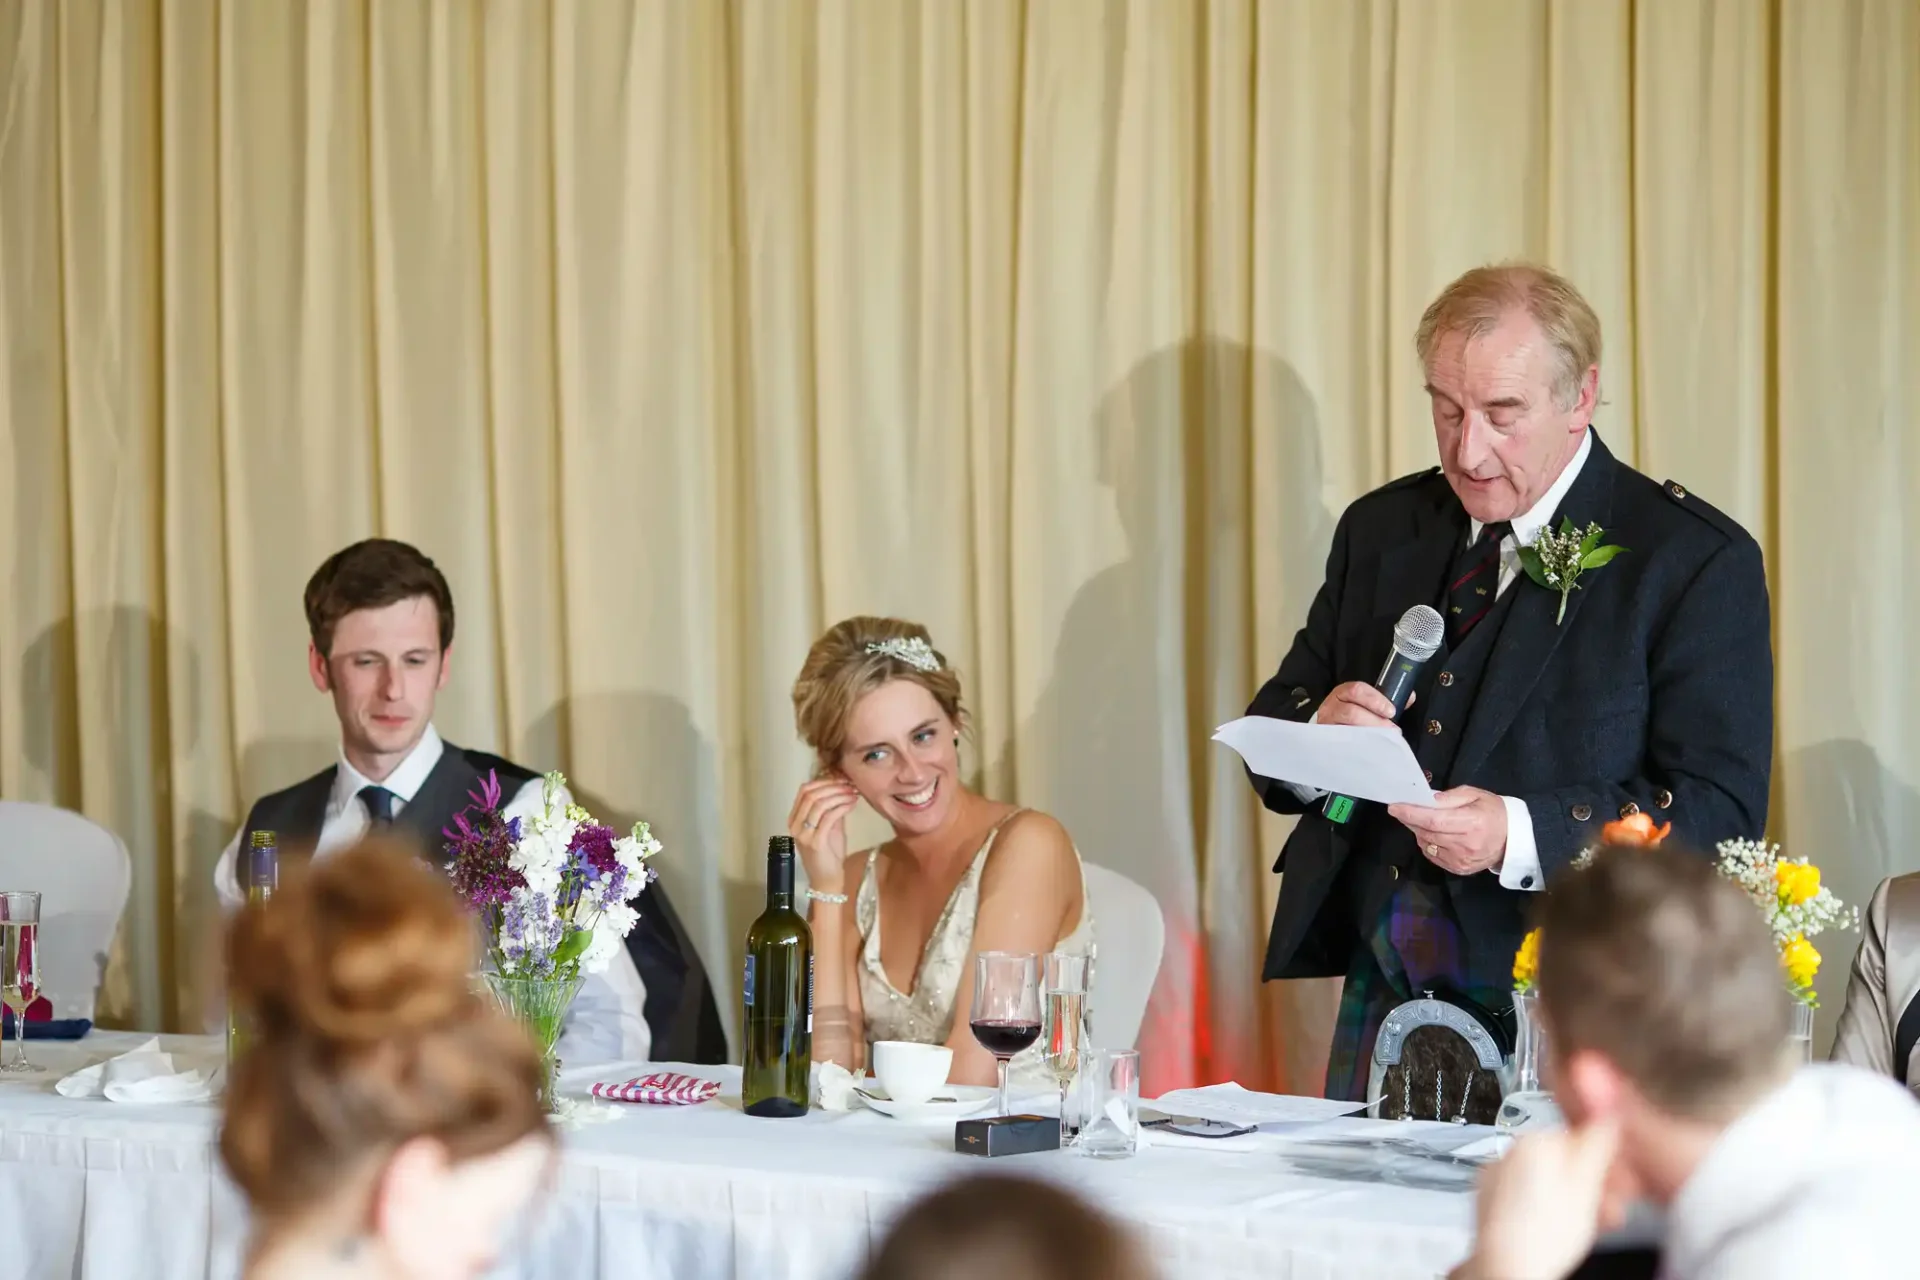 Man giving a speech at a wedding reception, standing next to a seated bride and groom at the head table, with guests listening.